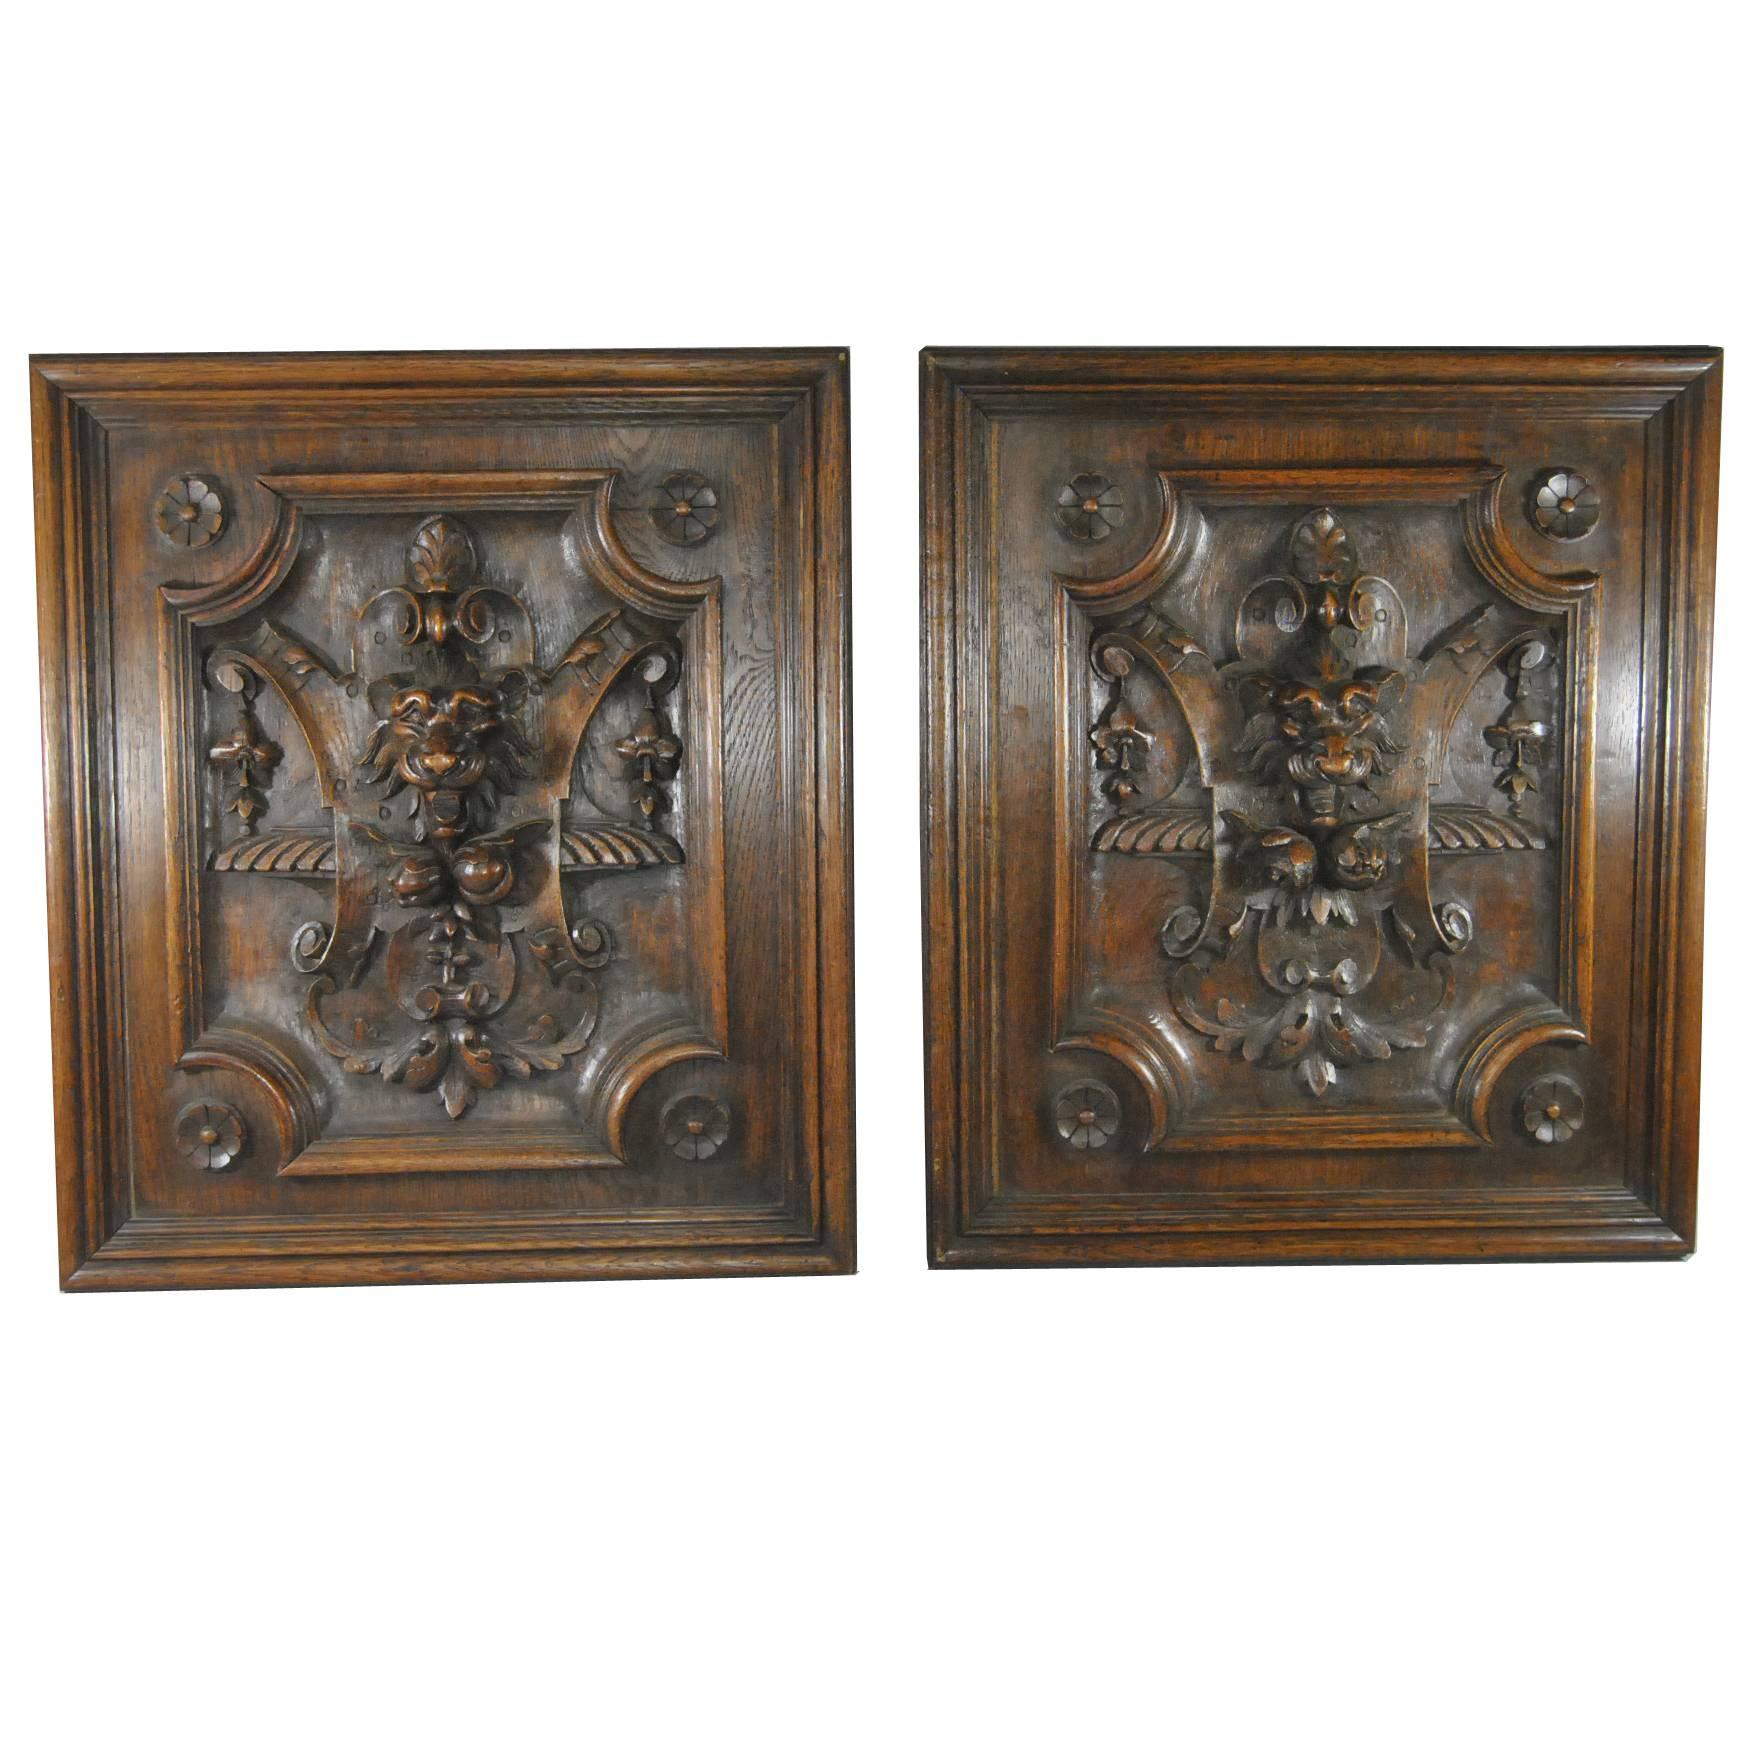 Tudor Style High Relief Carved Oak Panels with Lions Heads and Fruit